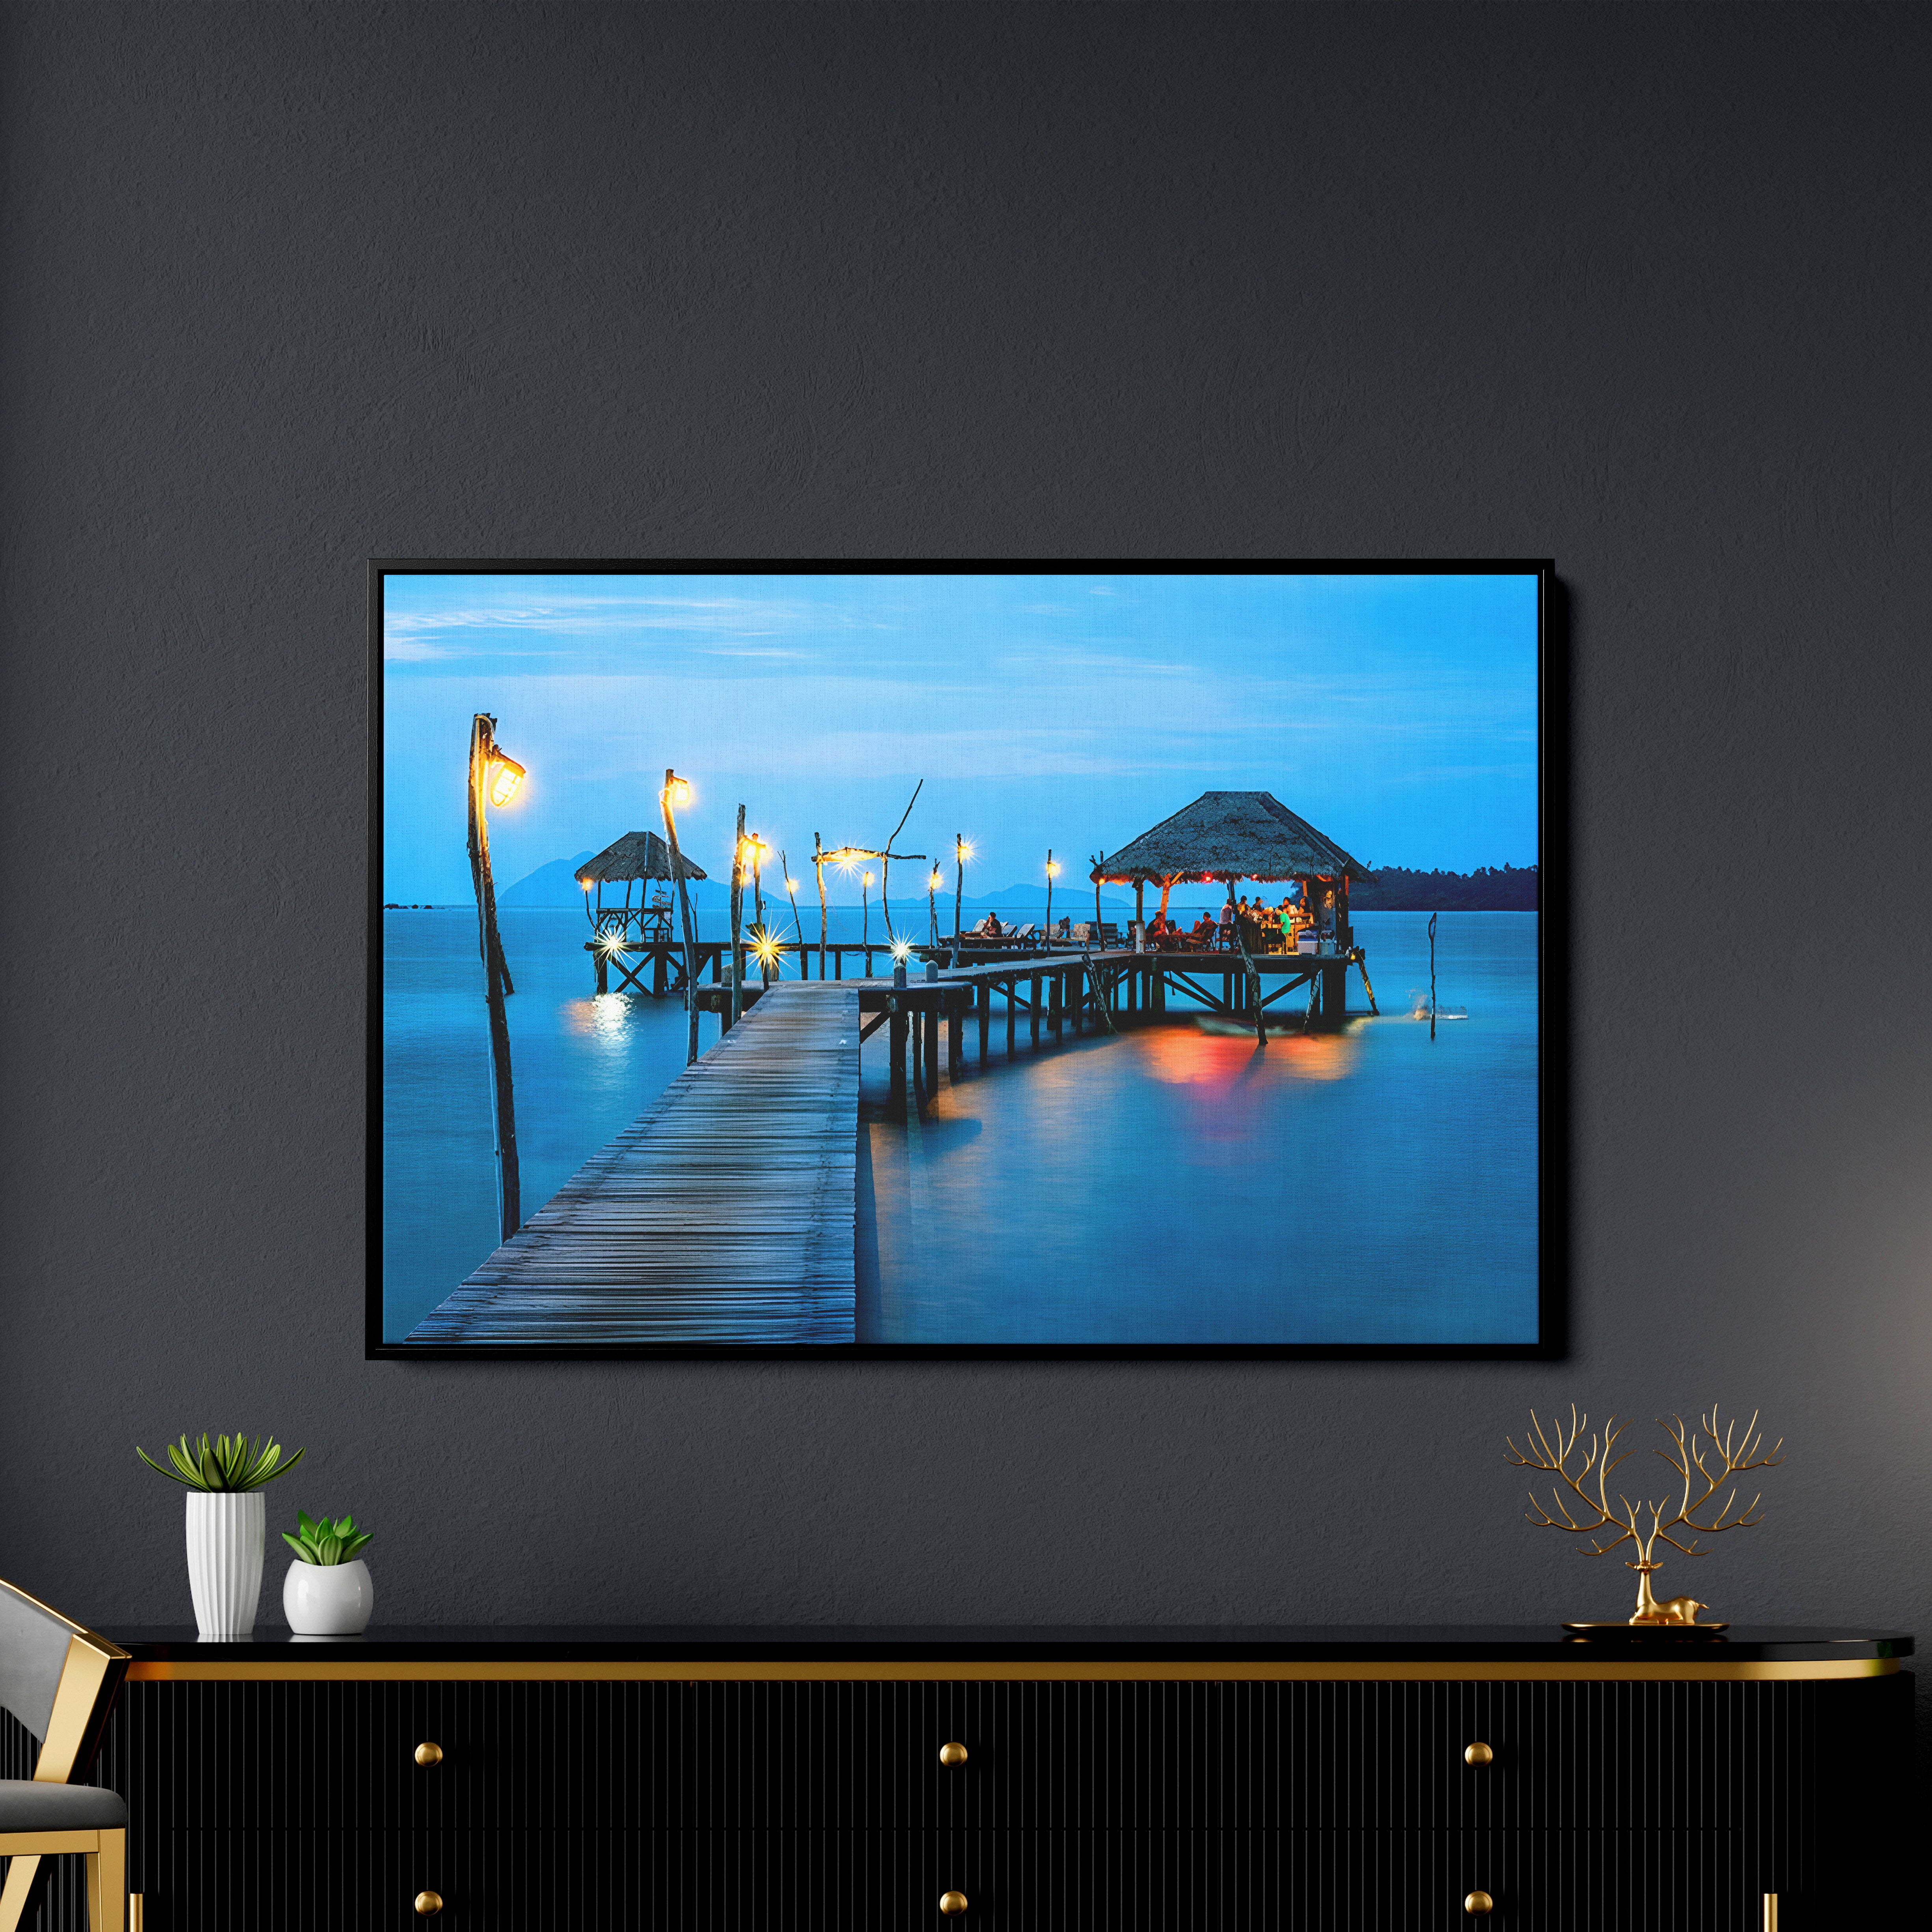 Tropical Resort in Thailand Premium Morden Art Canvas Wall Painting